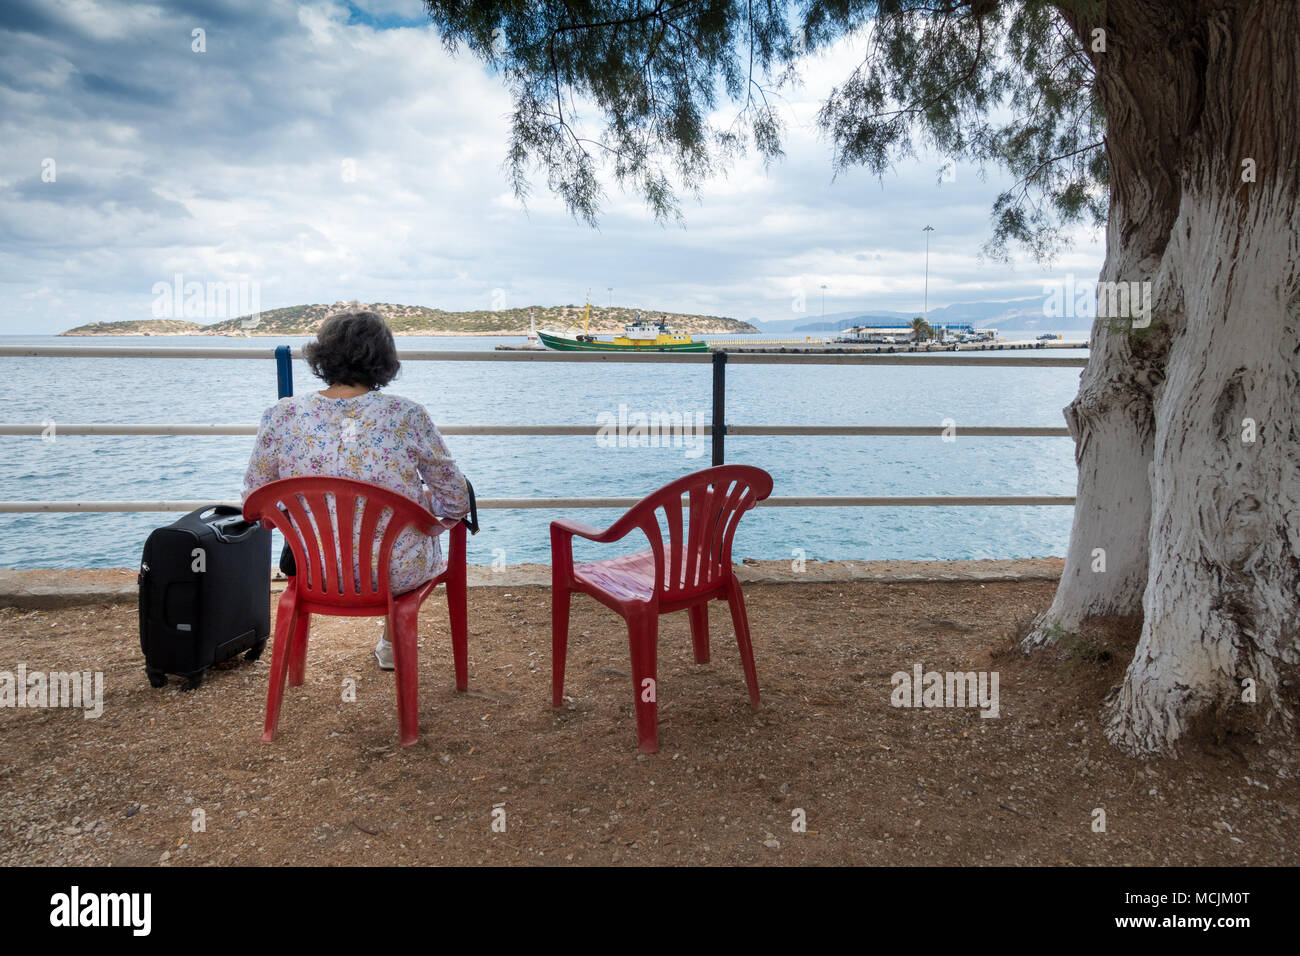 Rear view of senior woman sitting on chair admiring seascape Stock Photo